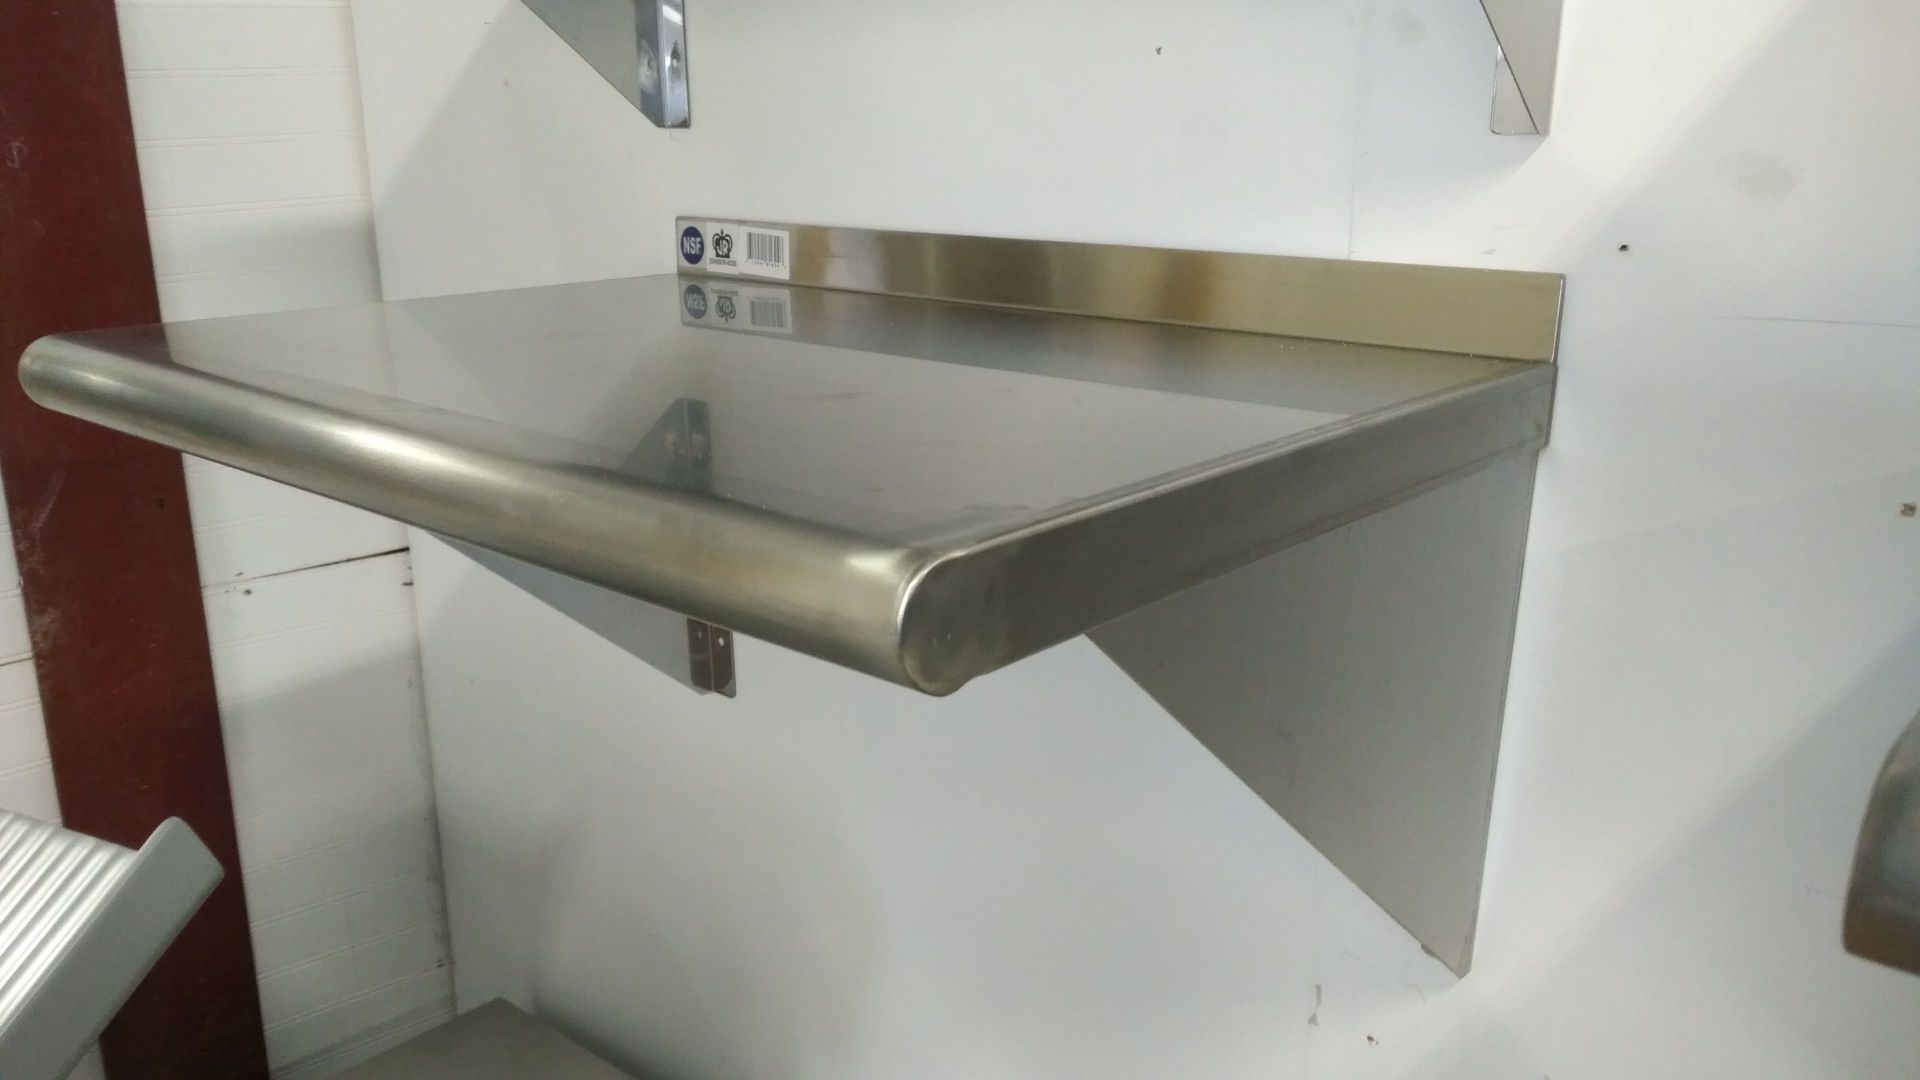 16" x 24" Stainless Wall Shelves - Lot of 2 - Image 5 of 6